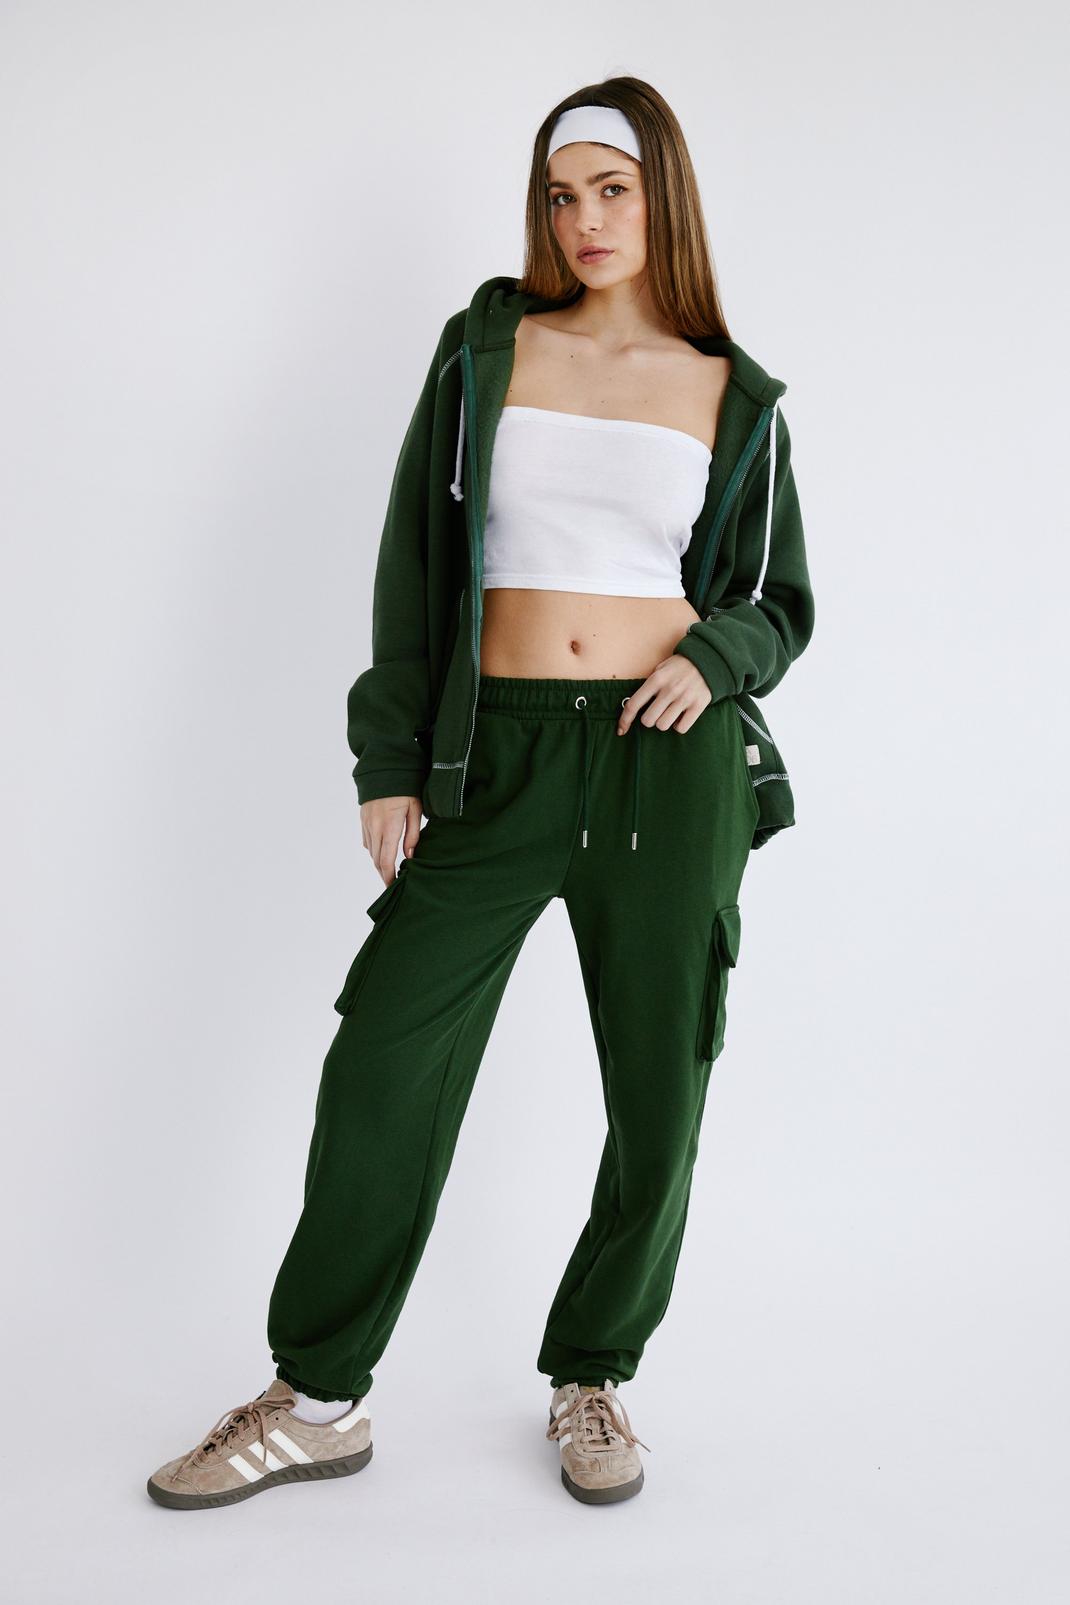 Gubotare Cargo Pants Women Joggers for Women High Waisted Women Sweatpants  with Pockets for Running Tapered Track Pants for Workout,Green XXL 